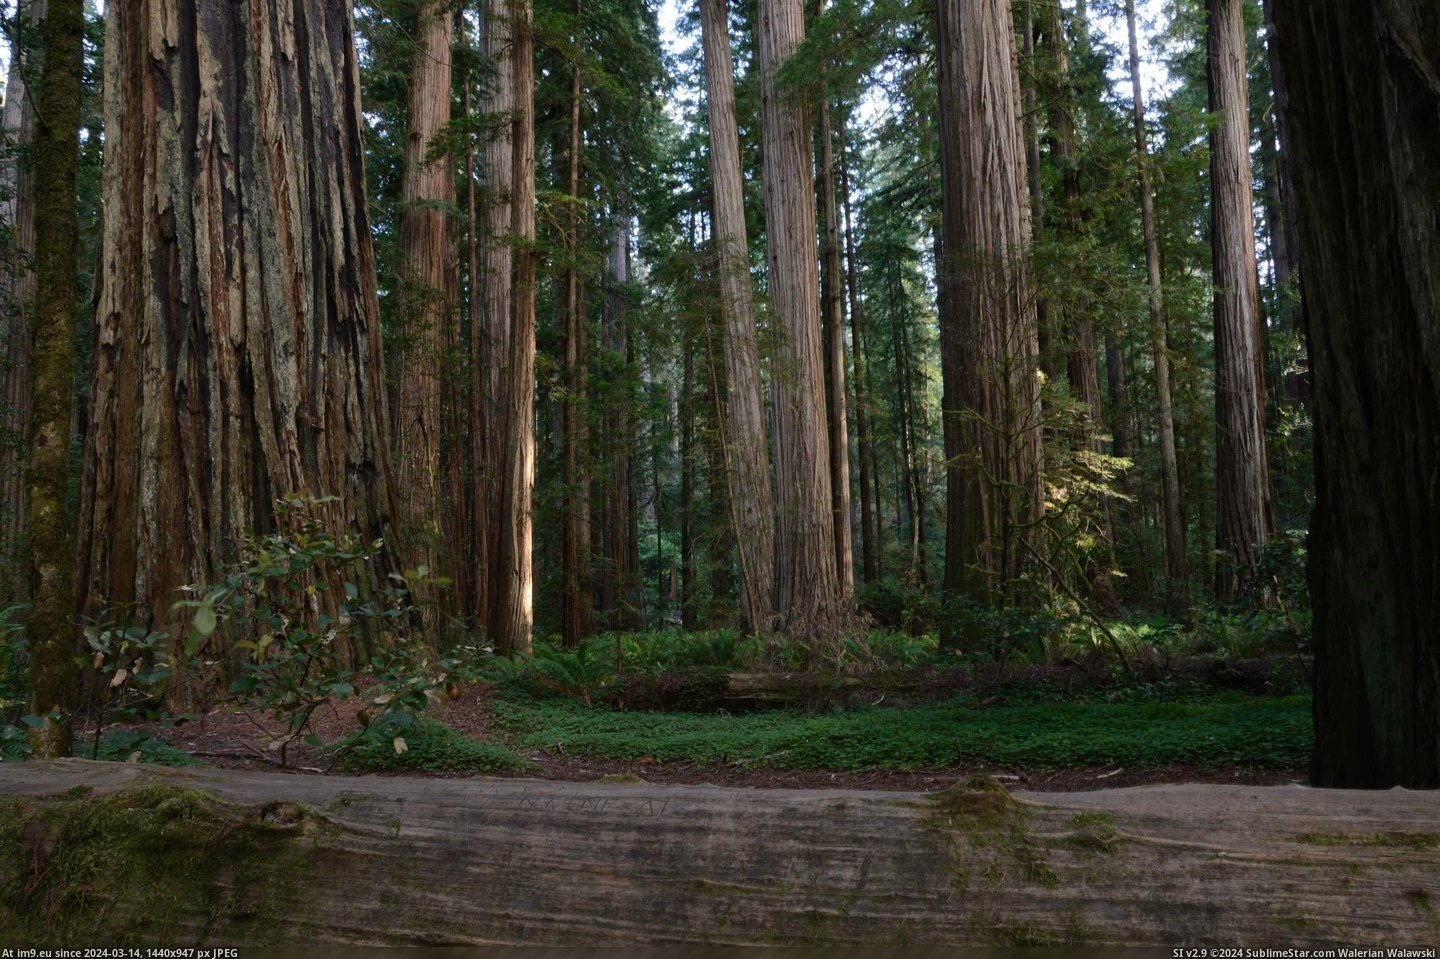 #Park #California #State #Redwoods #Jedediah #Smith #Redwood #Speaking [Earthporn] Speaking of Redwoods: Jedediah Smith Redwood State Park, California, [2710x1795] [OC] Pic. (Image of album My r/EARTHPORN favs))